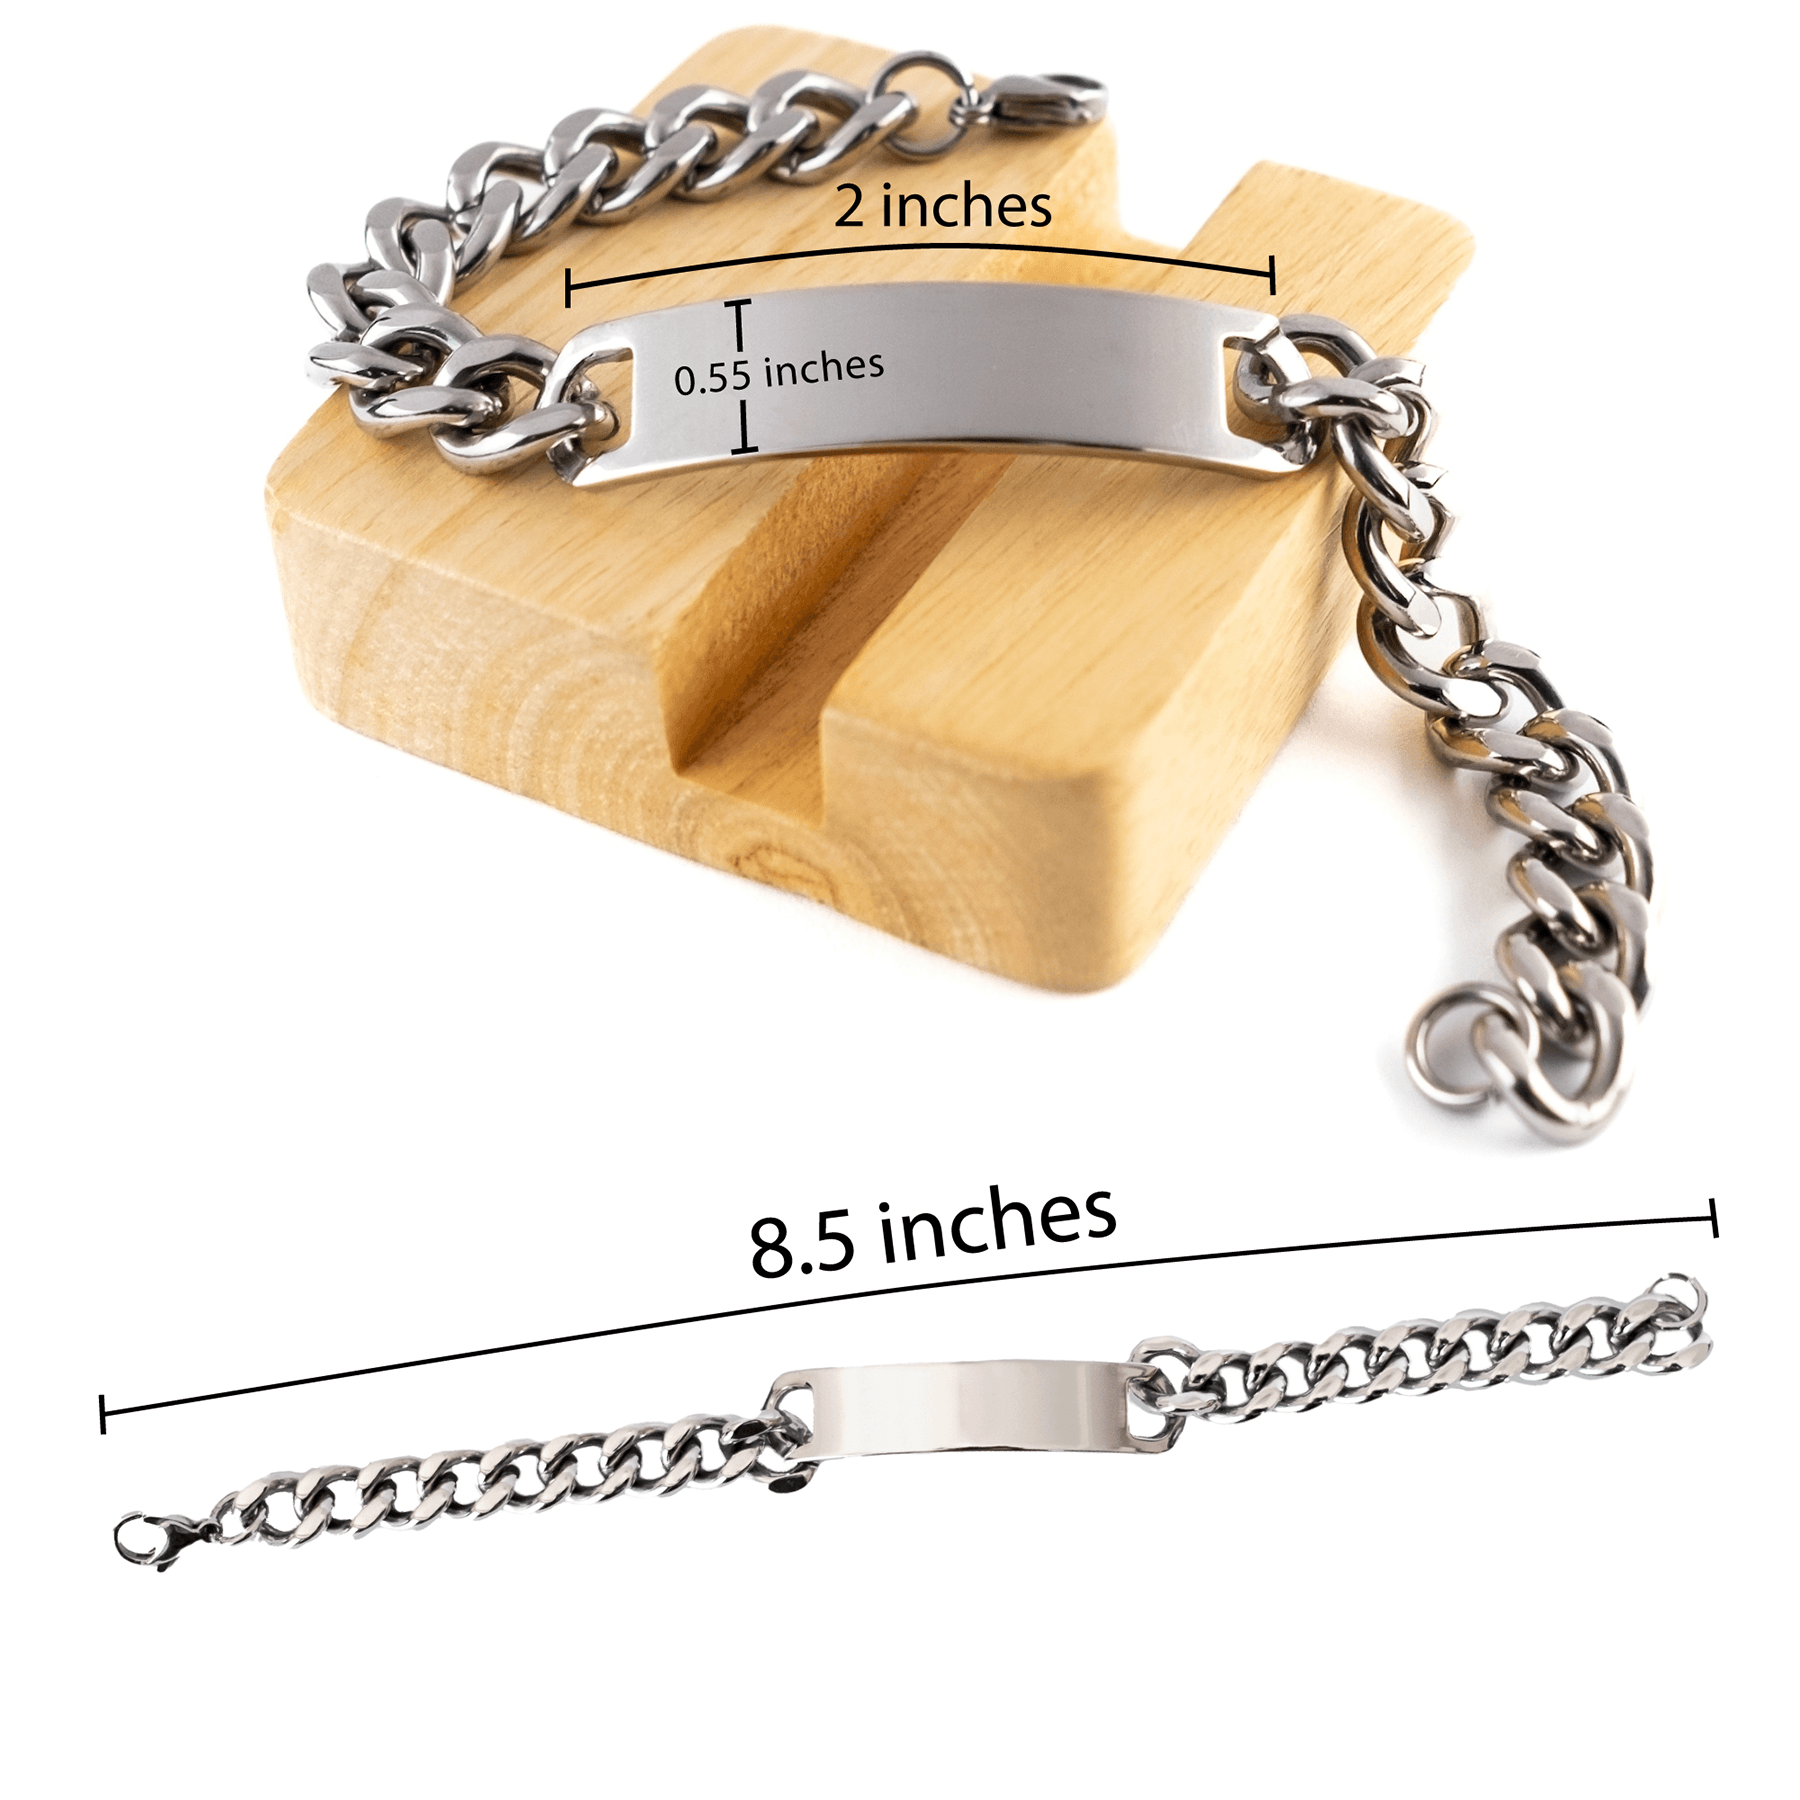 Orthopedic Surgeon Cuban Chain Link Engraved Bracelet - Thanks for being who you are - Birthday Christmas Jewelry Gifts Coworkers Colleague Boss - Mallard Moon Gift Shop